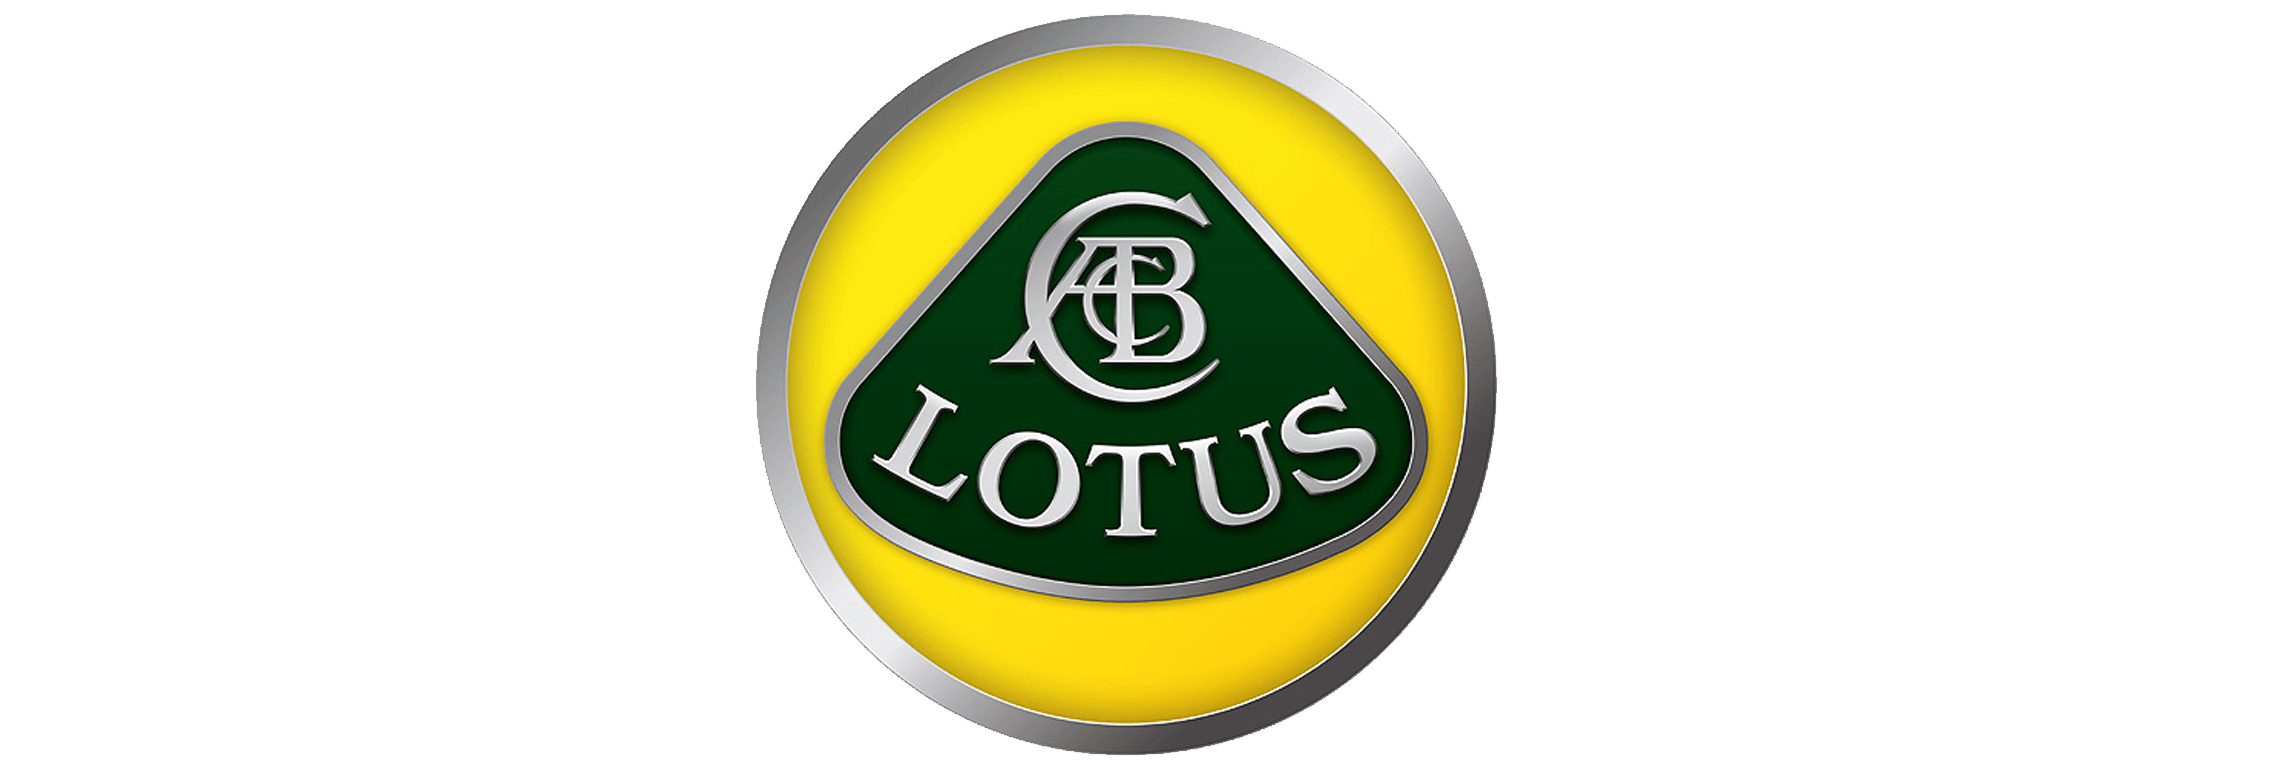 Green and Yellow Car Logo - Lotus Logo Meaning and History, latest models | World Cars Brands